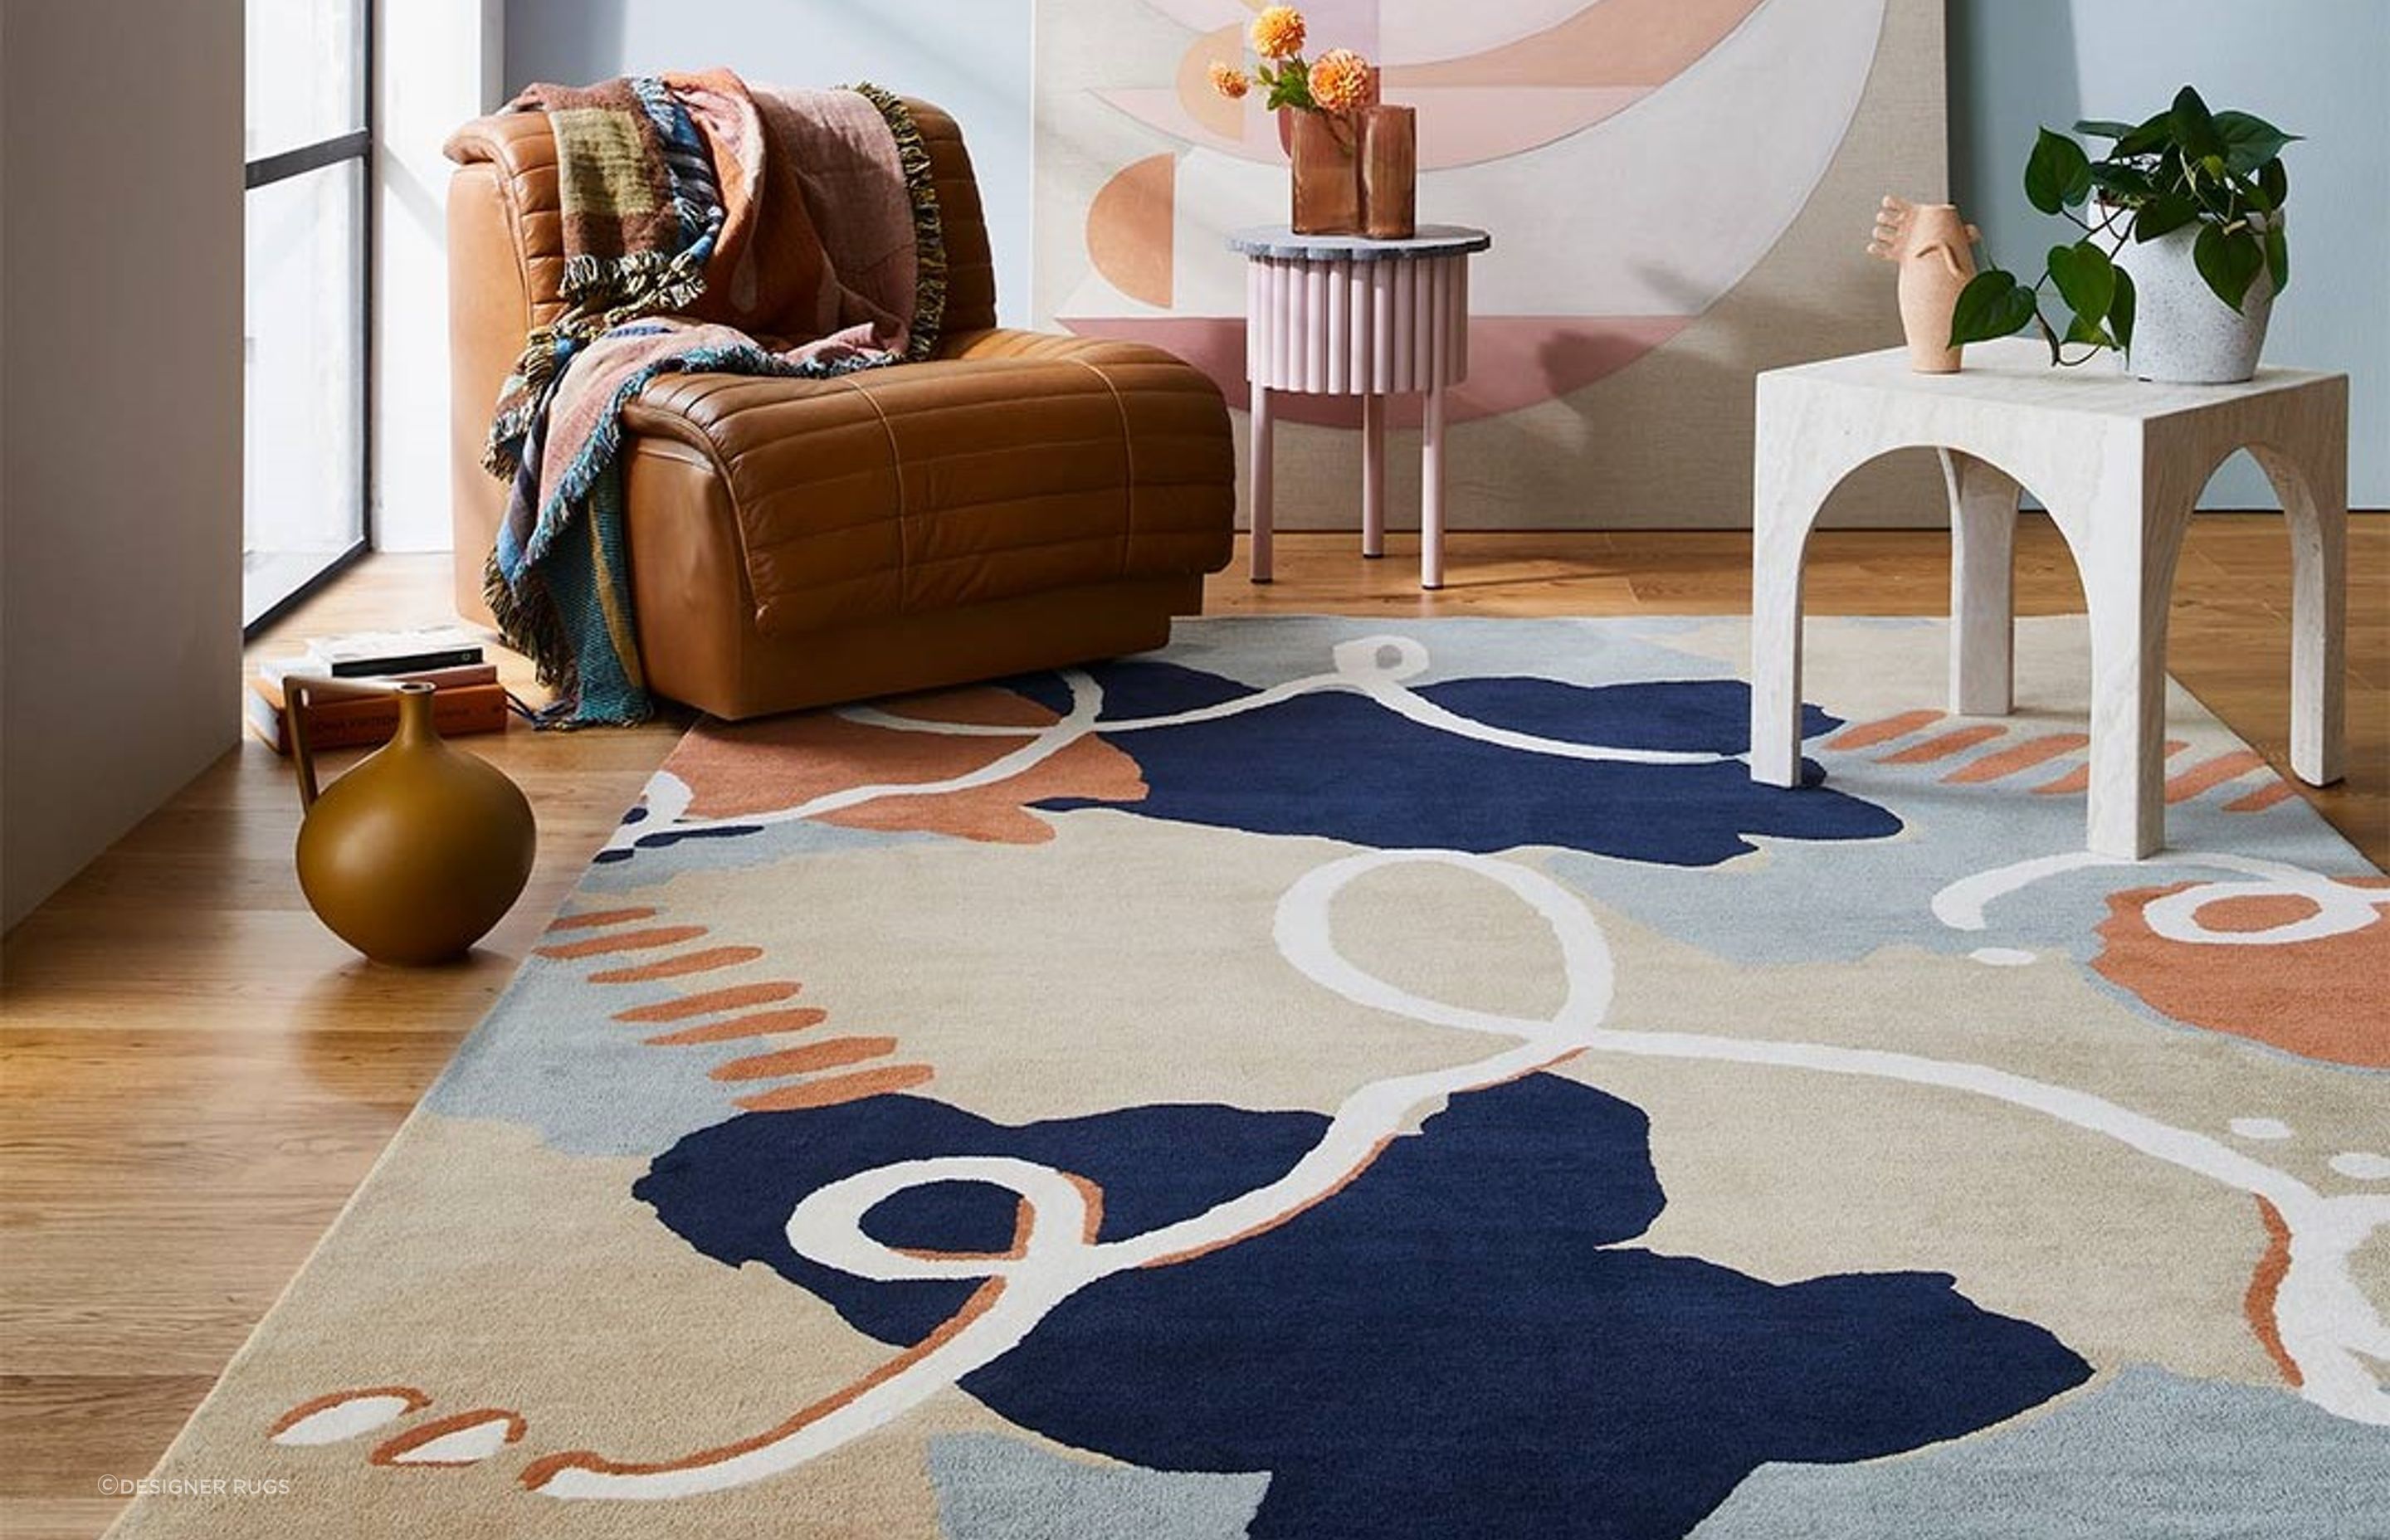 The on-trend Palette Blue/Brown Rug is a great example of the different rug styles that are available to homeowners in Australia